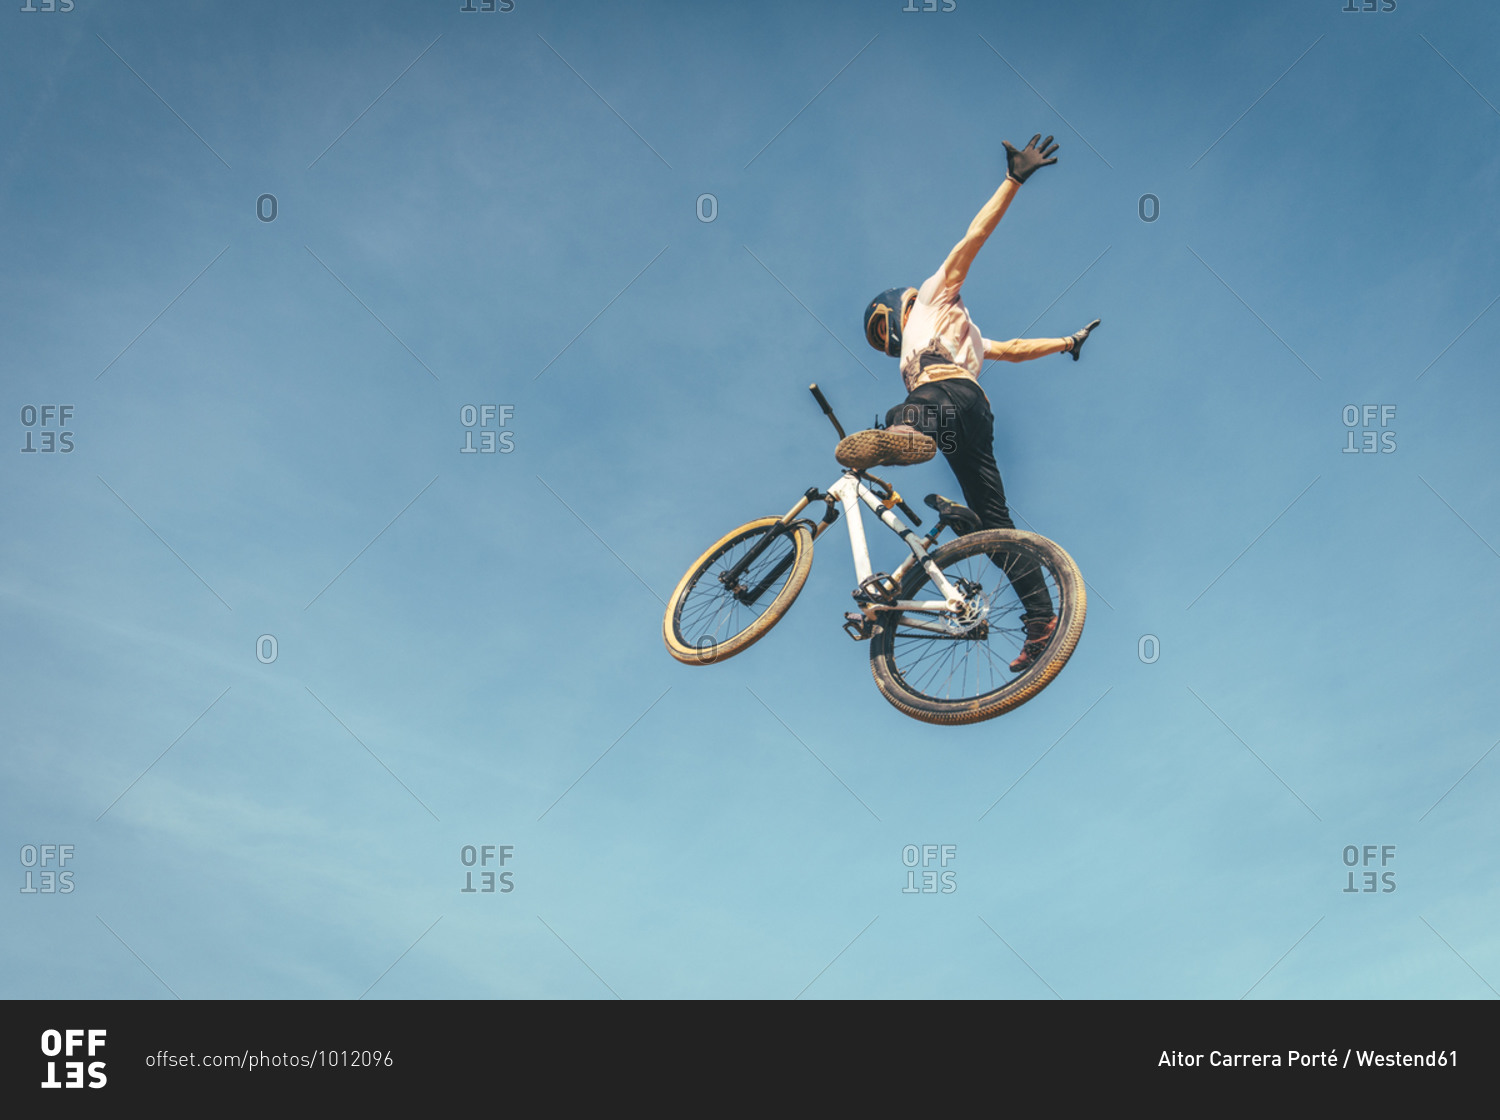 Carefree man performing stunt with bicycle against blue sky during sunset